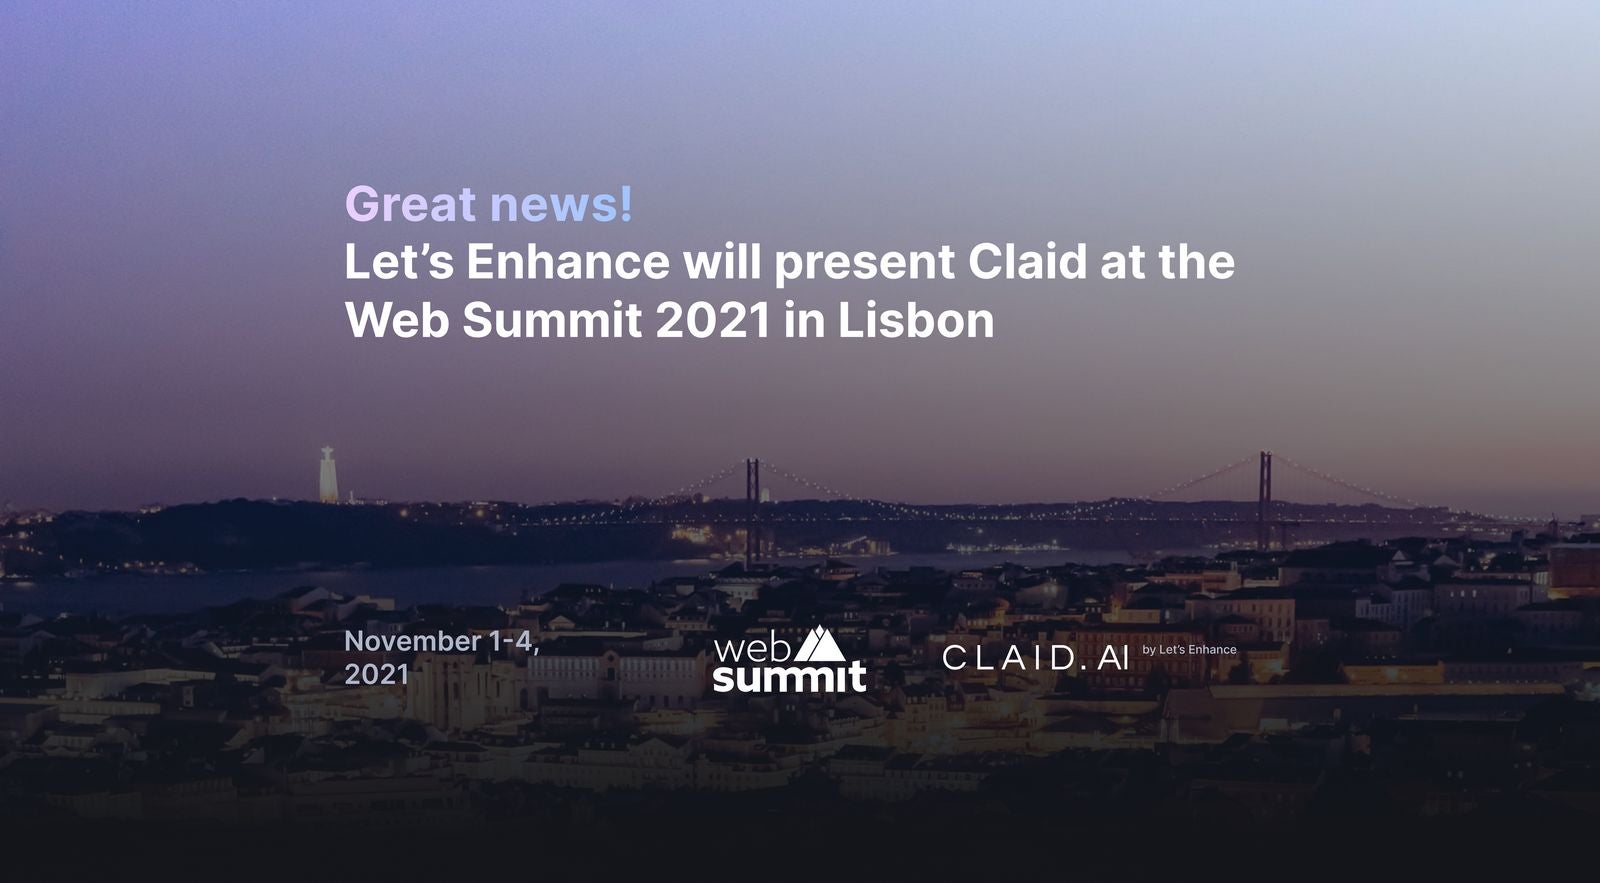 Let’s Enhance will present Claid at the world’s largest tech event